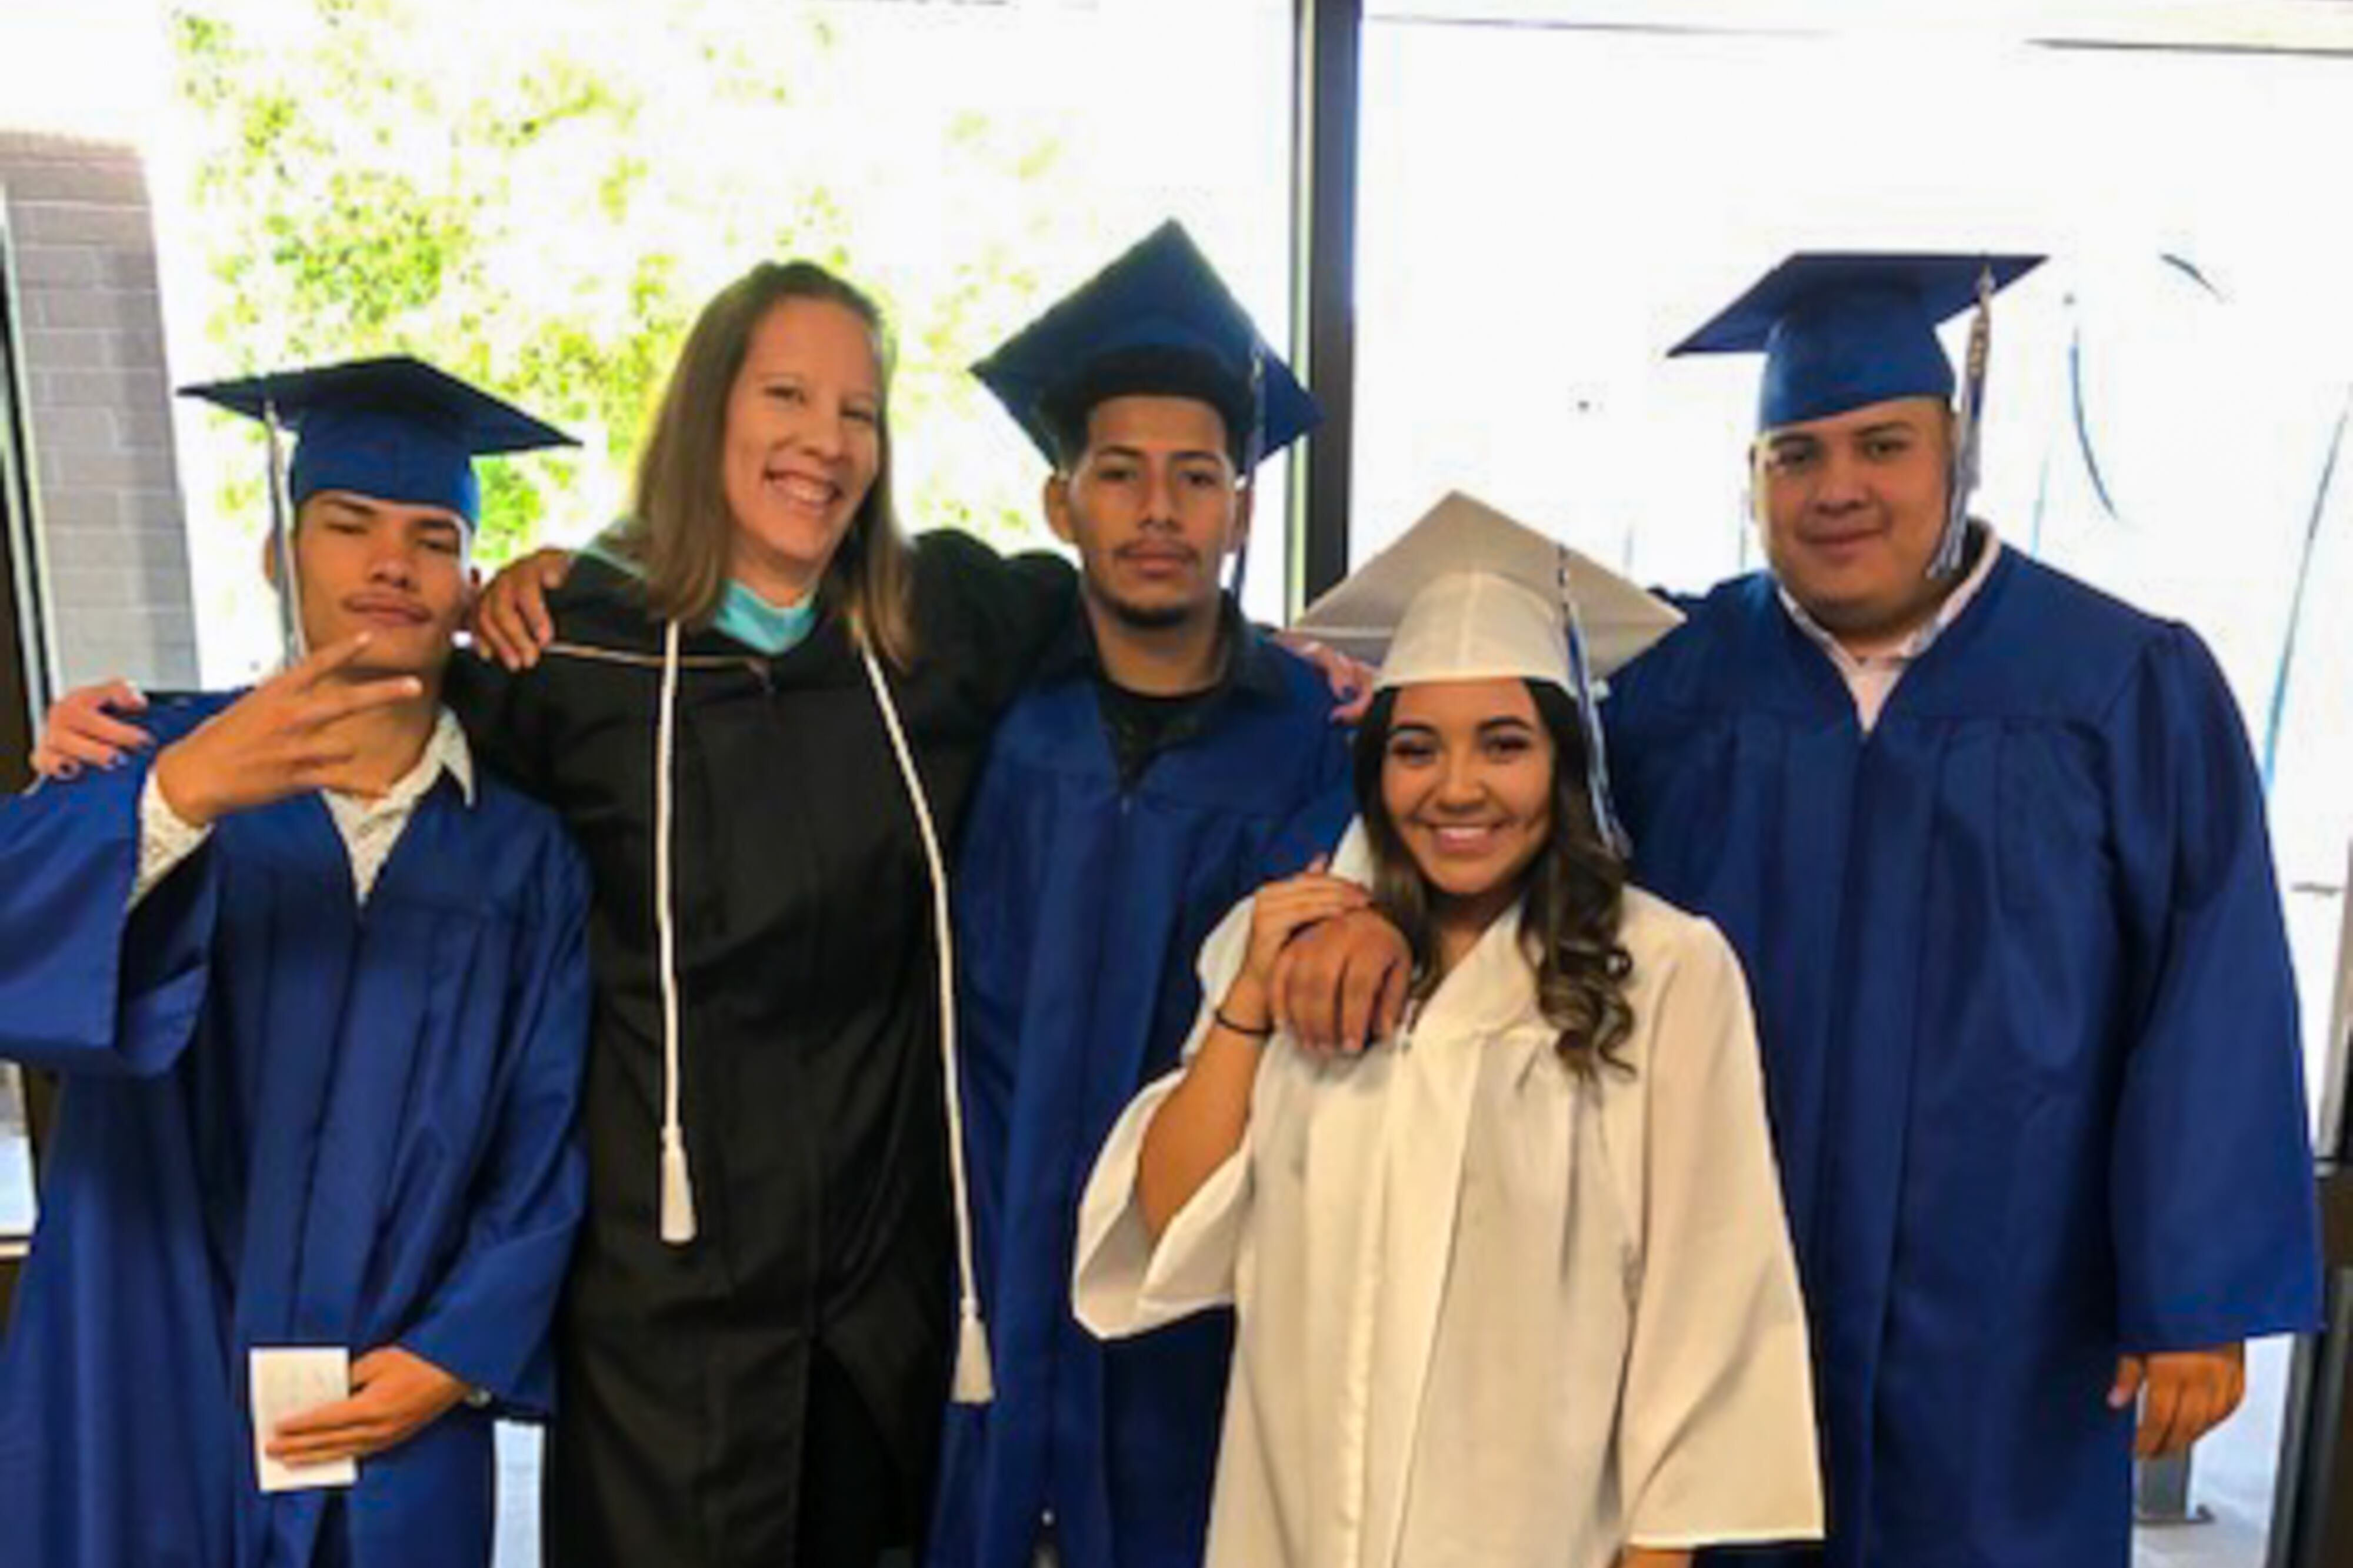 A teacher stands with four graduating seniors who are wearing blue and white graduation gowns.